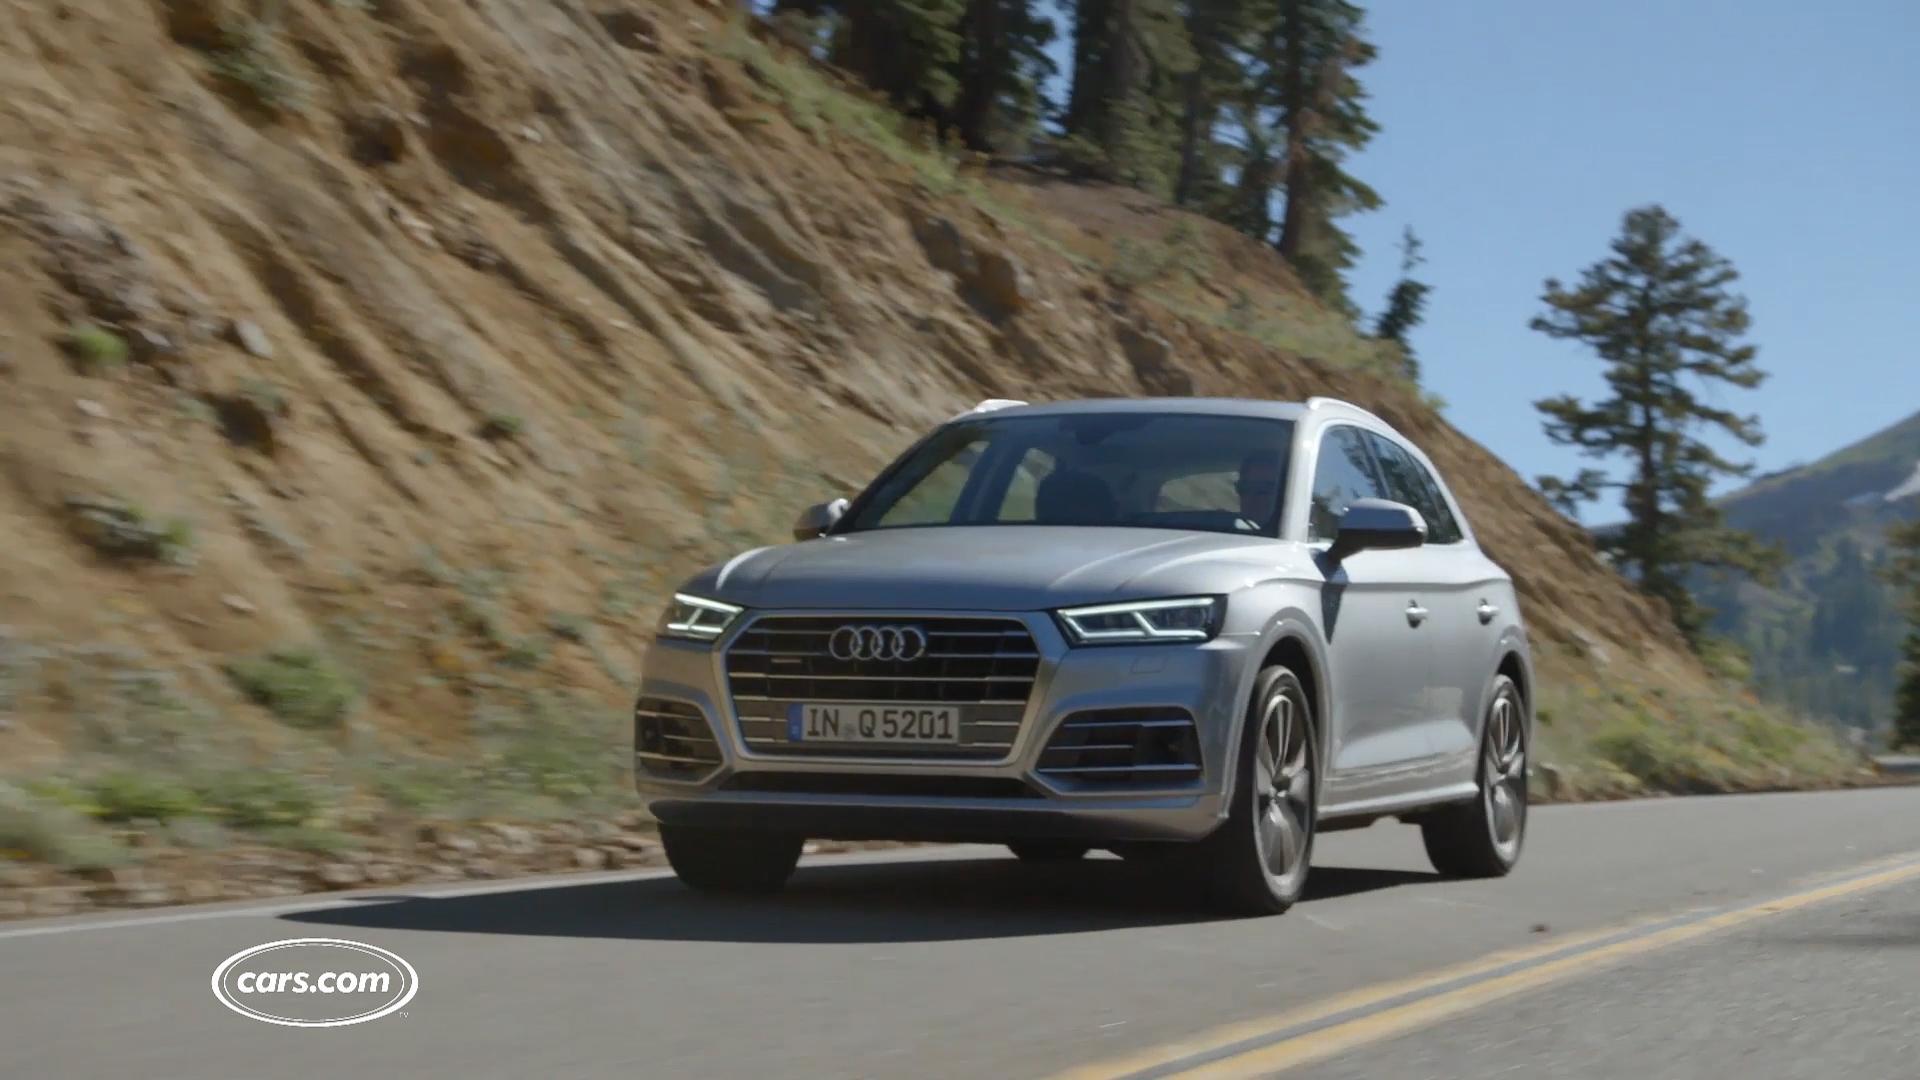 2018 Audi SQ5: A danger to sports sedans or window dressing over